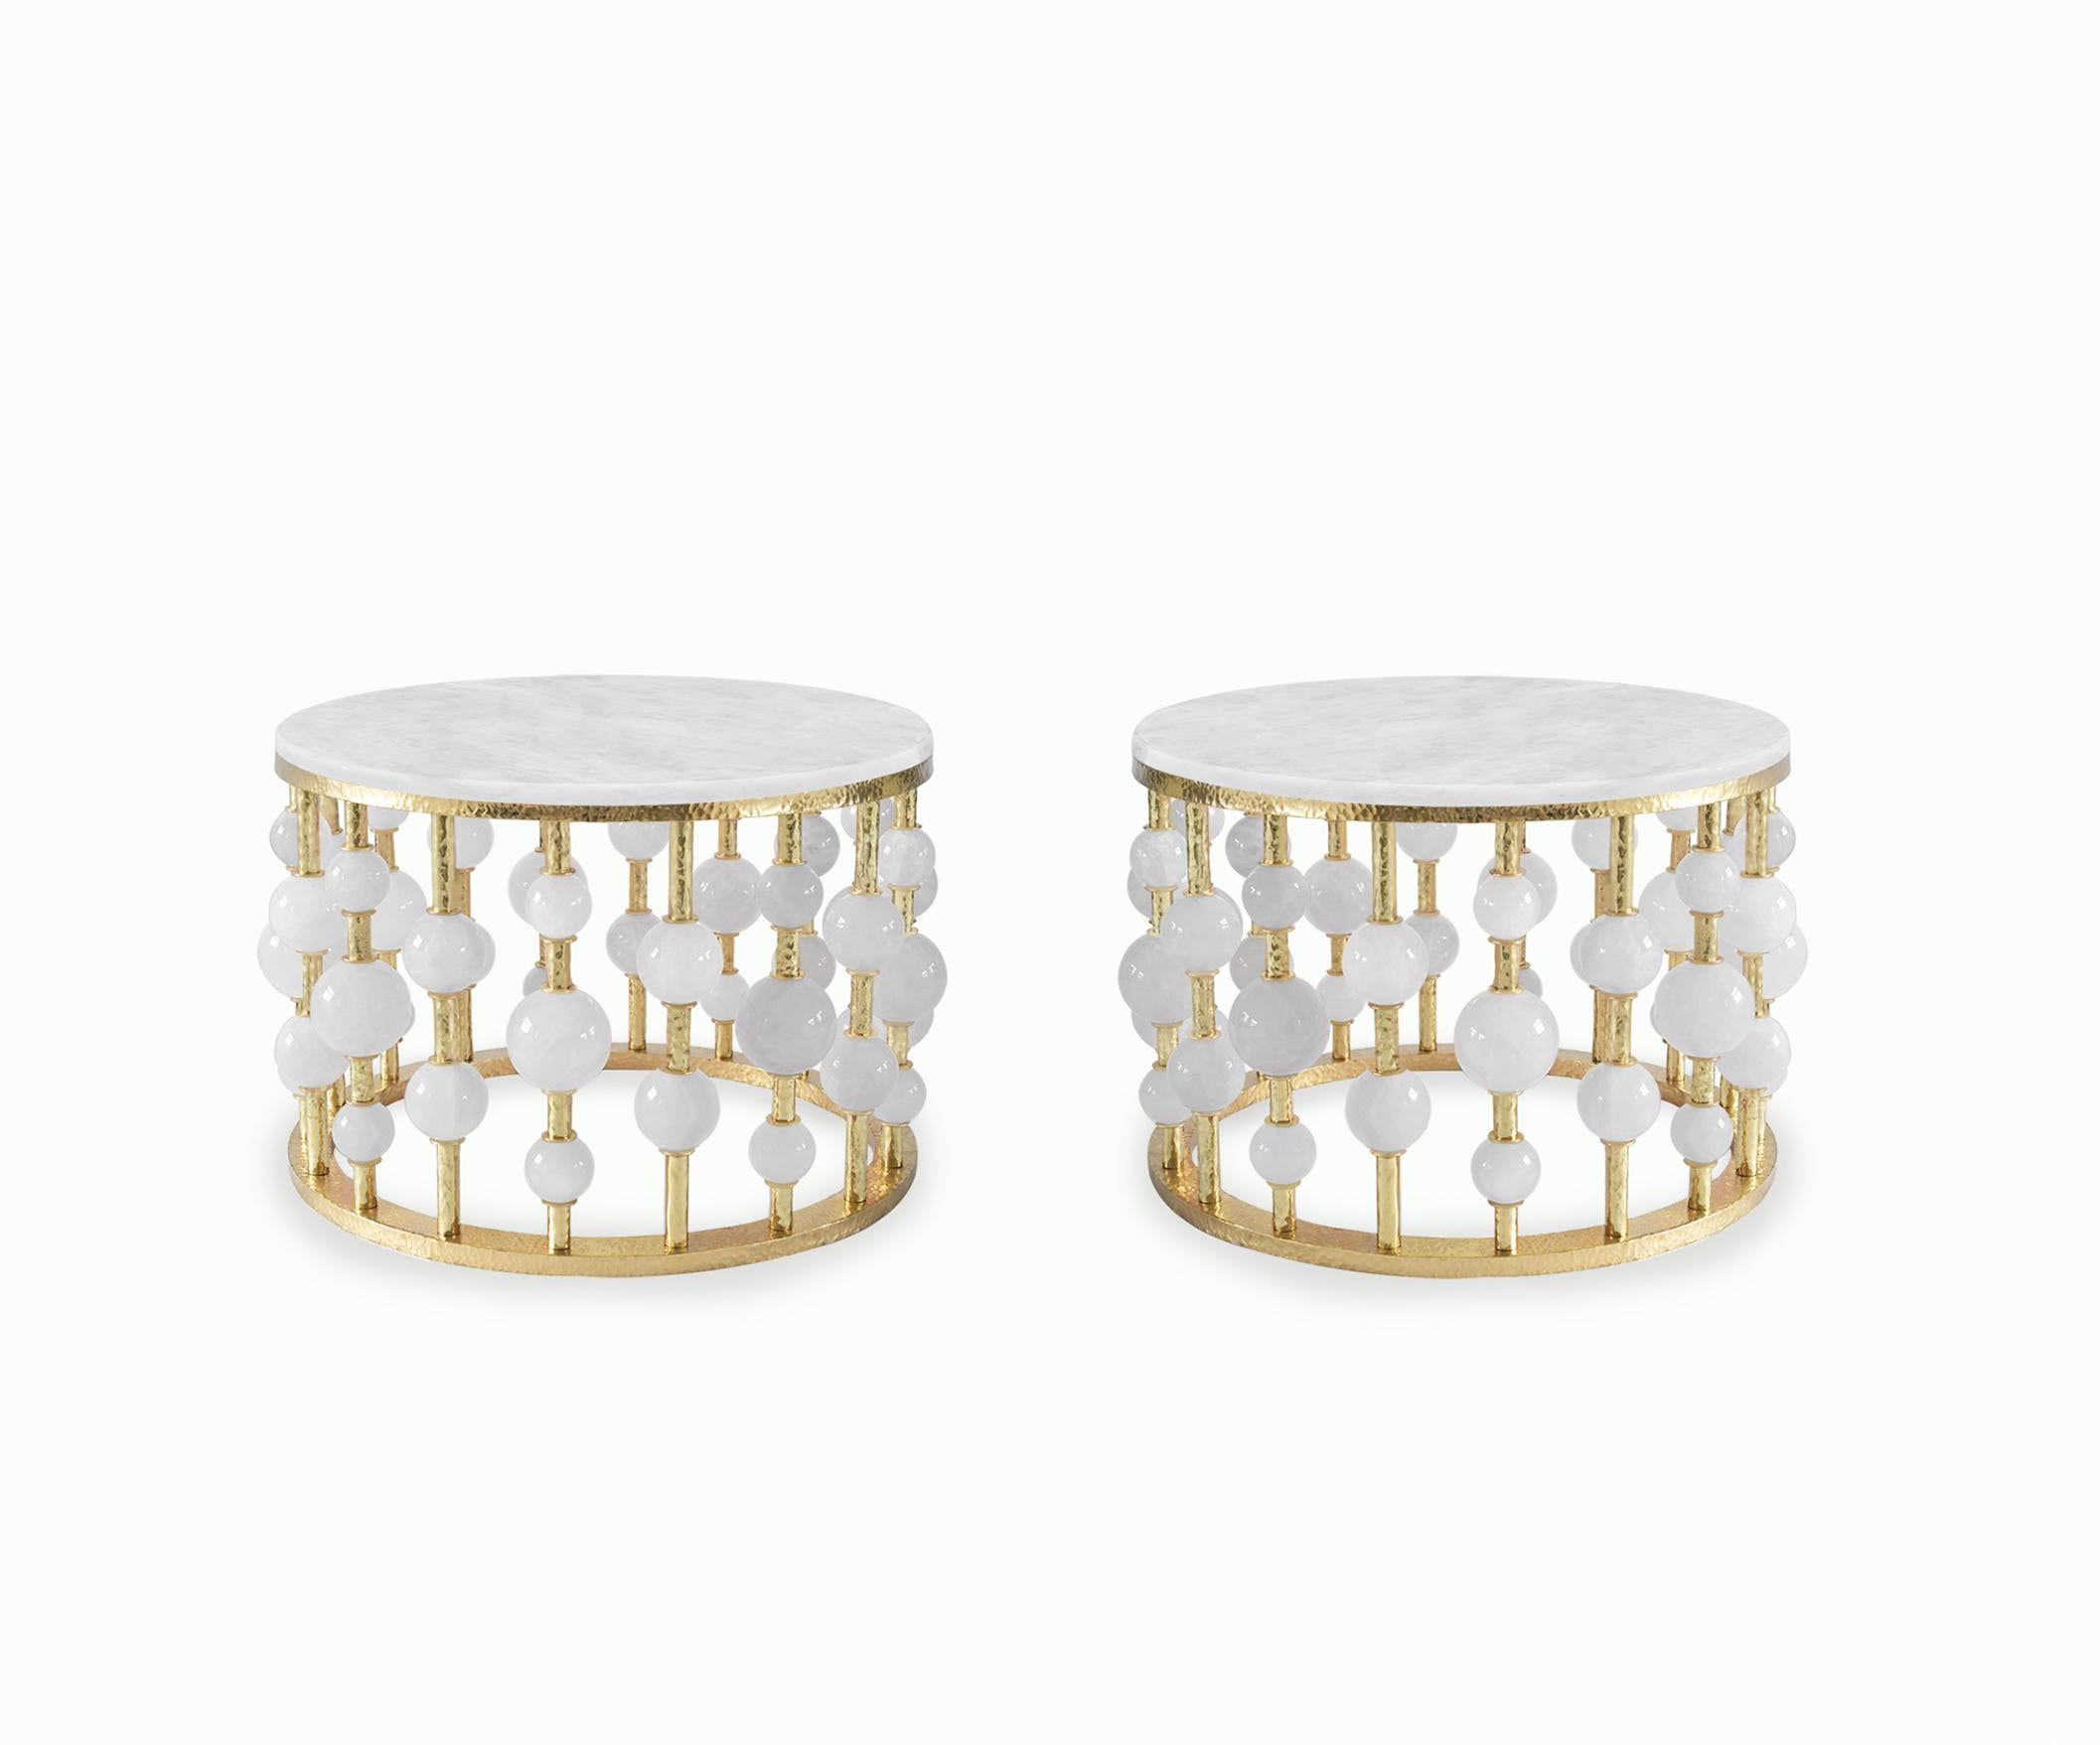 Pair of rock crystal bubble Cocktail Tables with hammered brass frames. Created by Phoenix Gallery, NYC.
Custom size, finish, and quantity upon request.